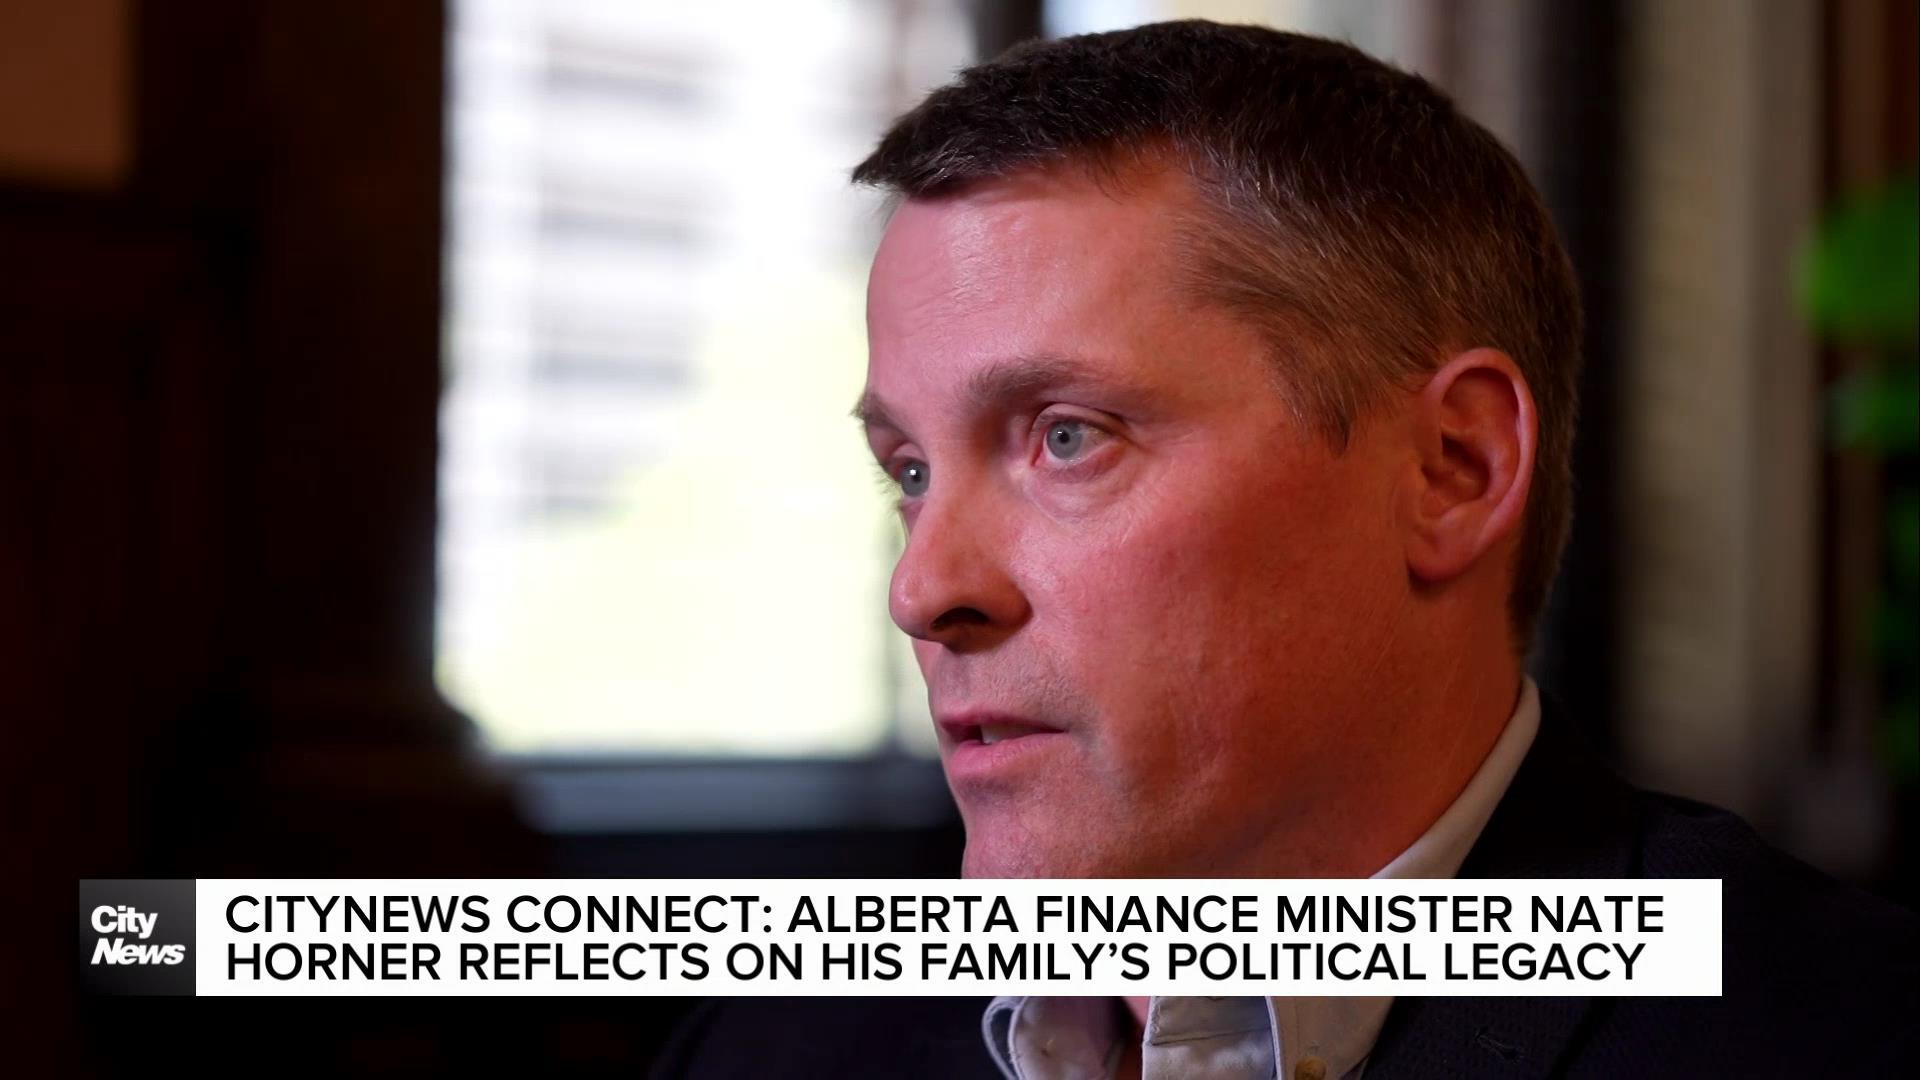 CityNews Connect: Alberta Finance Minister reflects on his family’s political legacy